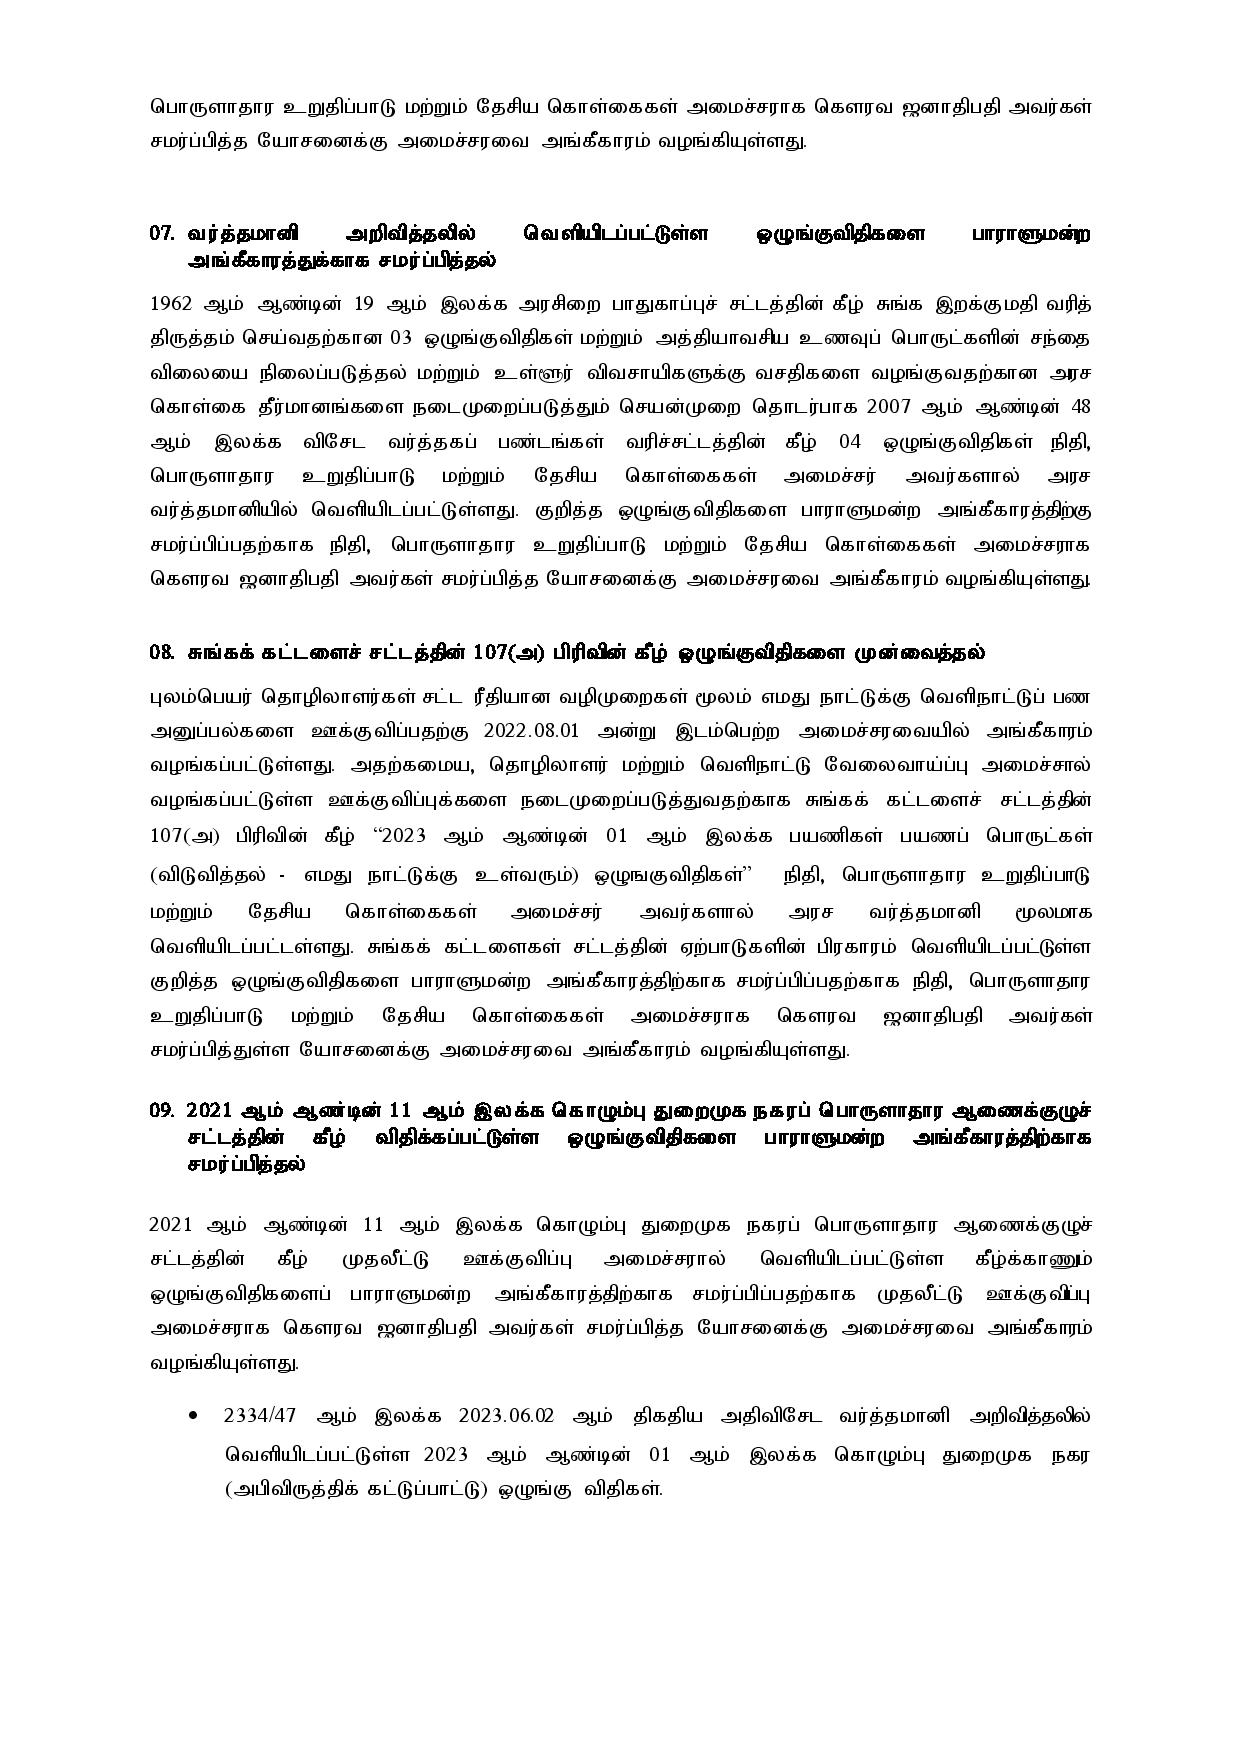 Cabinet Decision on 28.08.2023 Tamil page 003